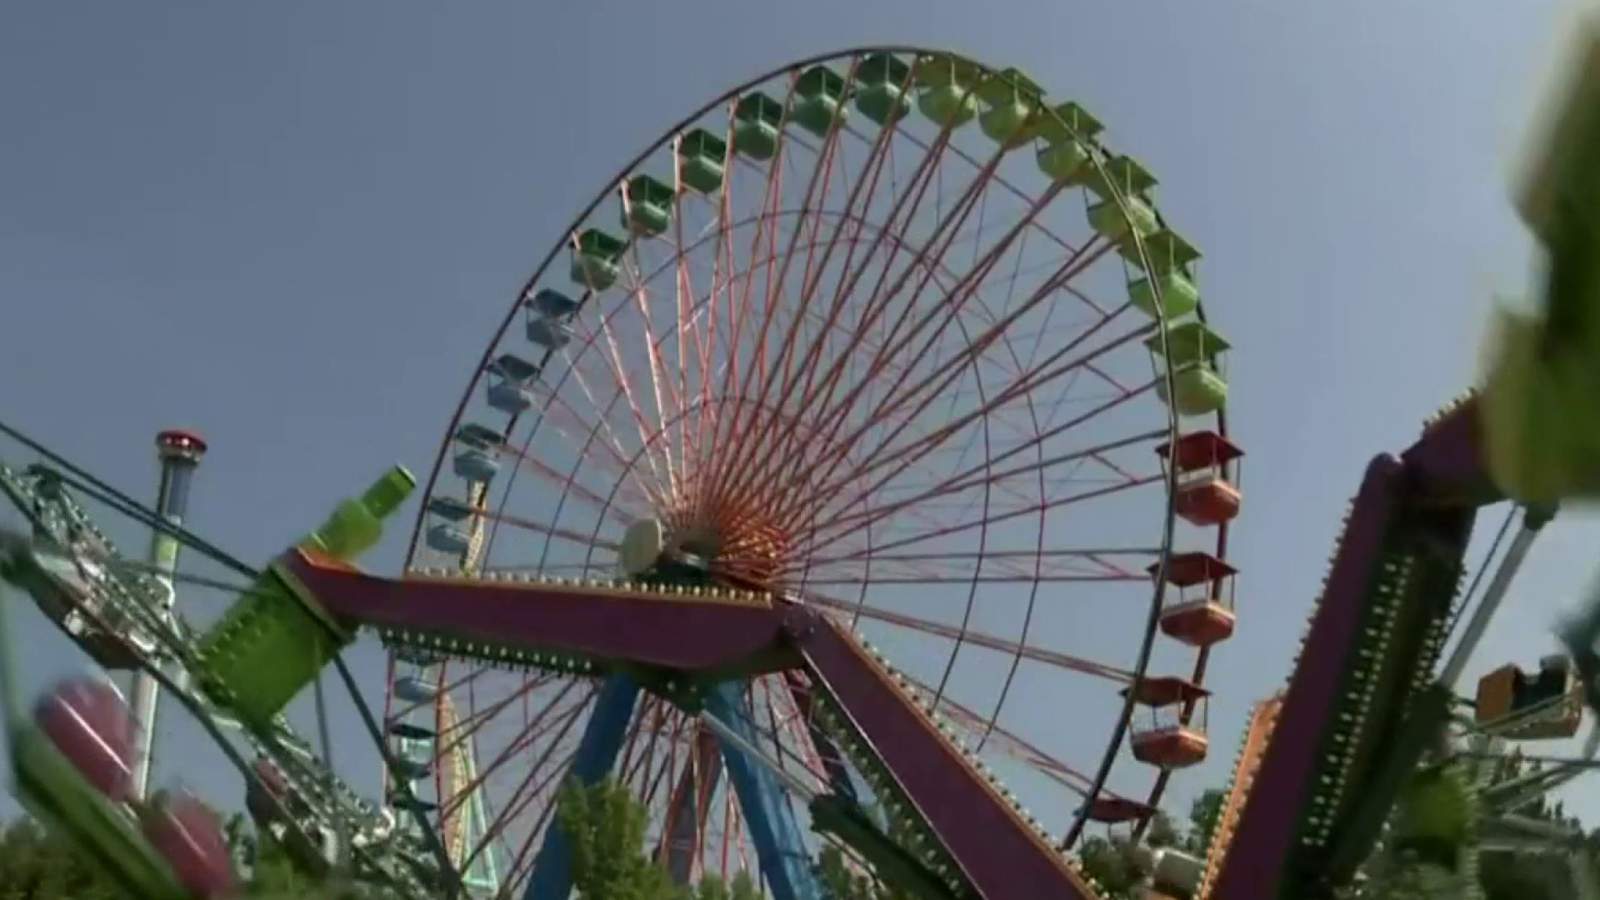 Cedar Point reopens with safety precautions in place